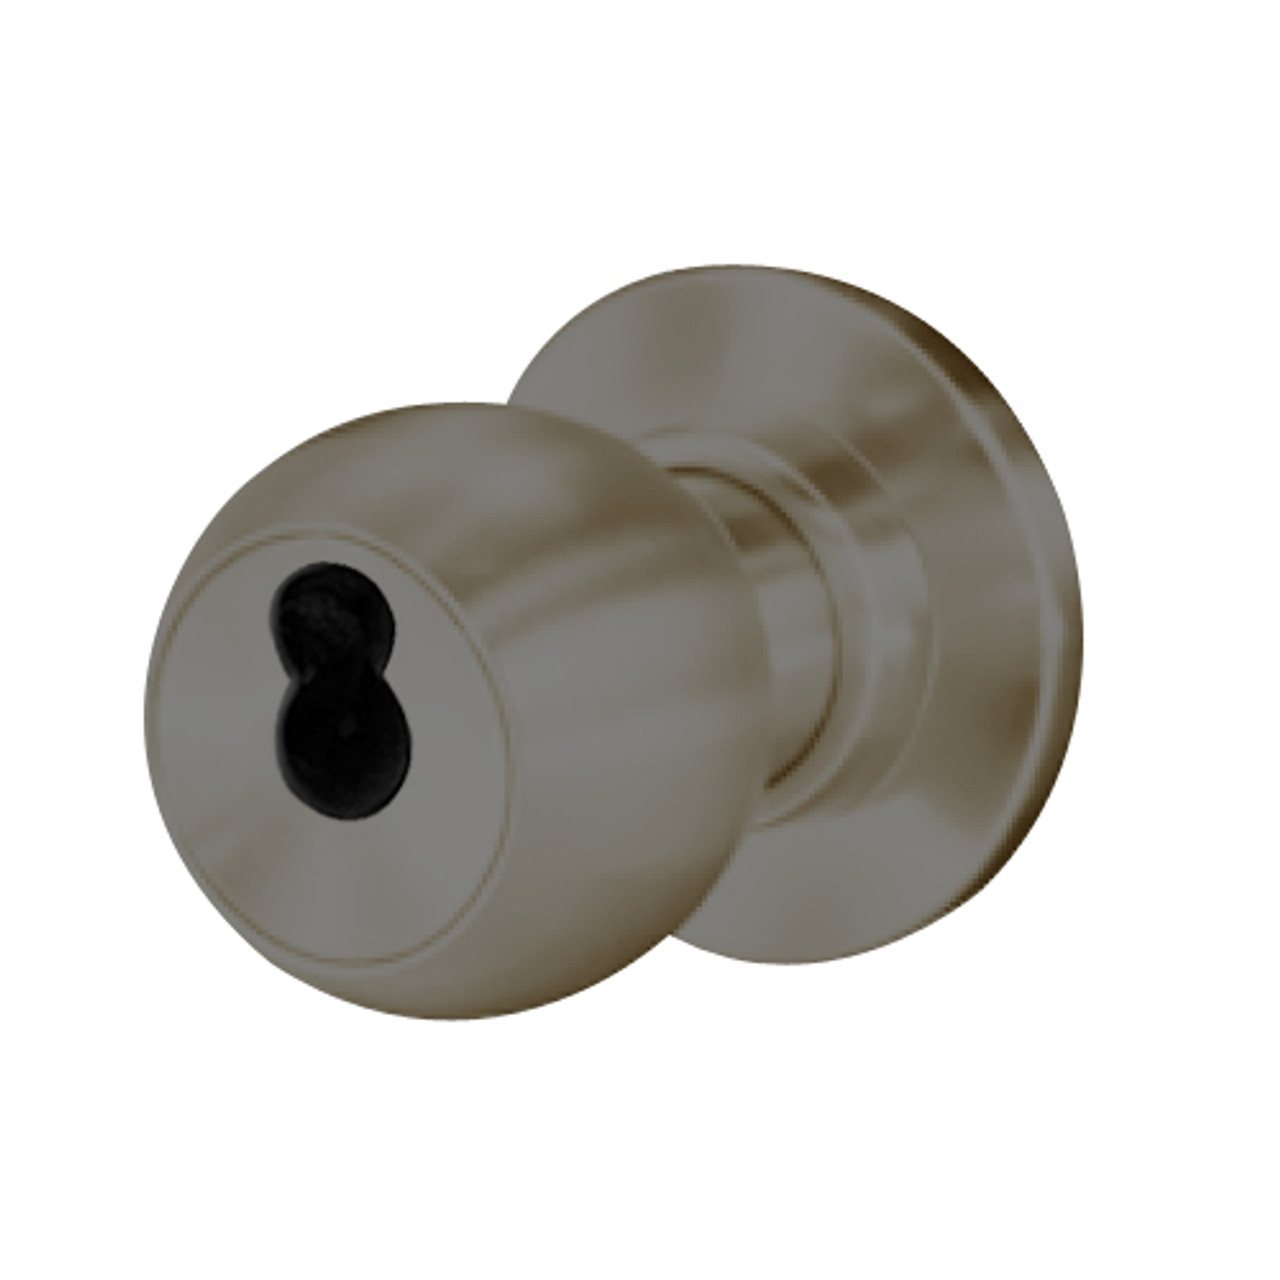 8K37YR4CSTK613 Best 8K Series Exit Heavy Duty Cylindrical Knob Locks with Round Style in Oil Rubbed Bronze